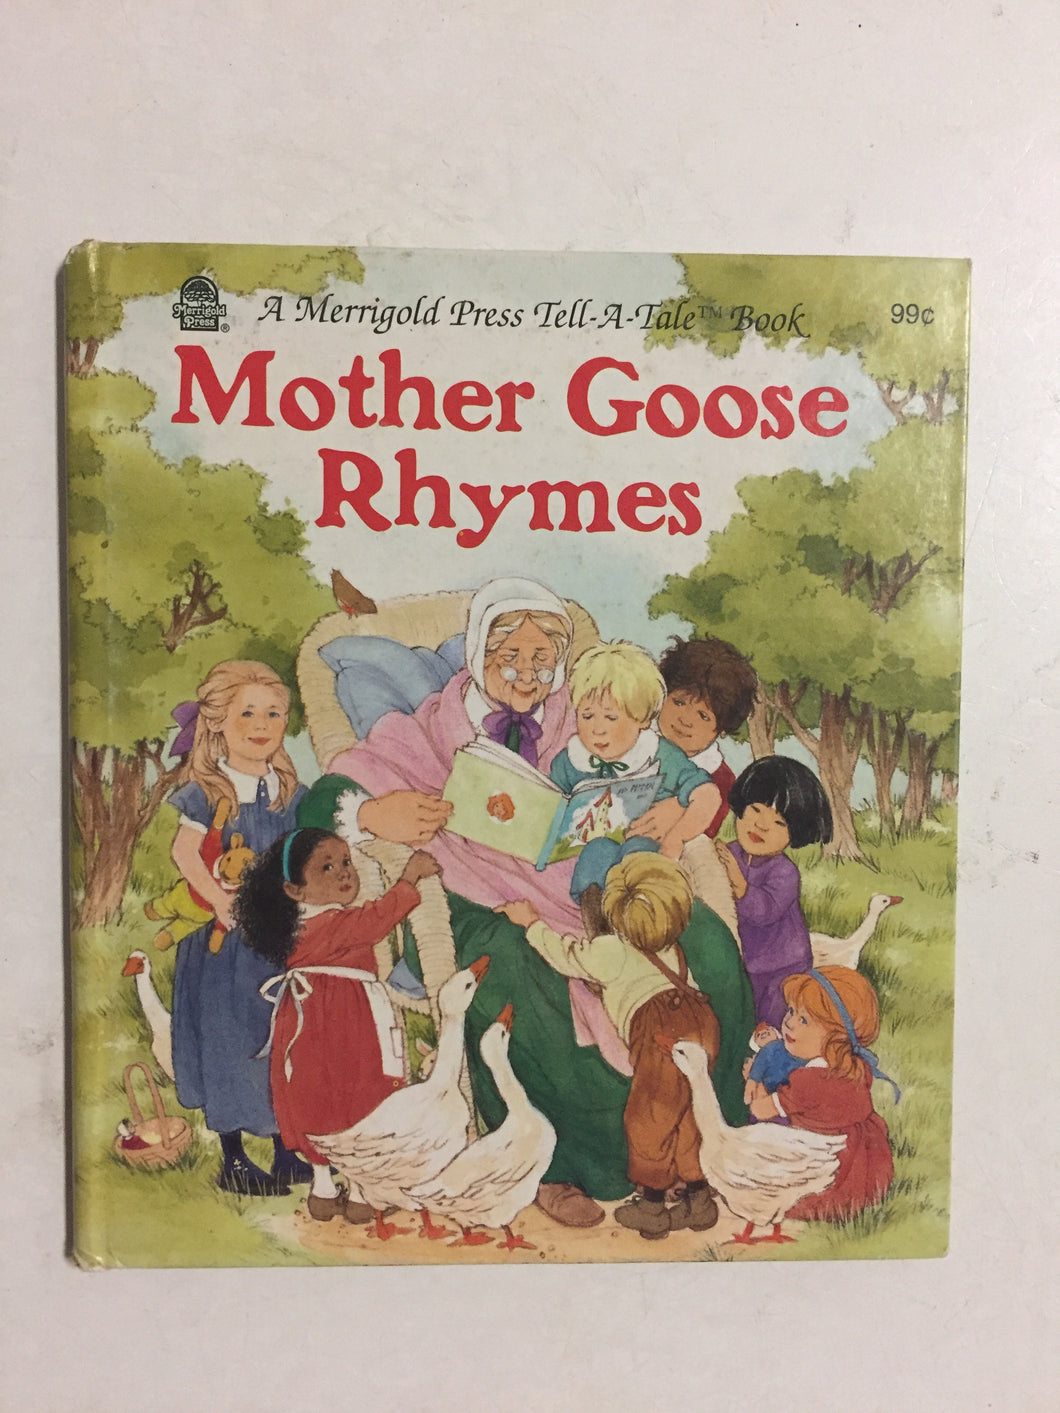 Mother Goose Rhymes - Slick Cat Books 